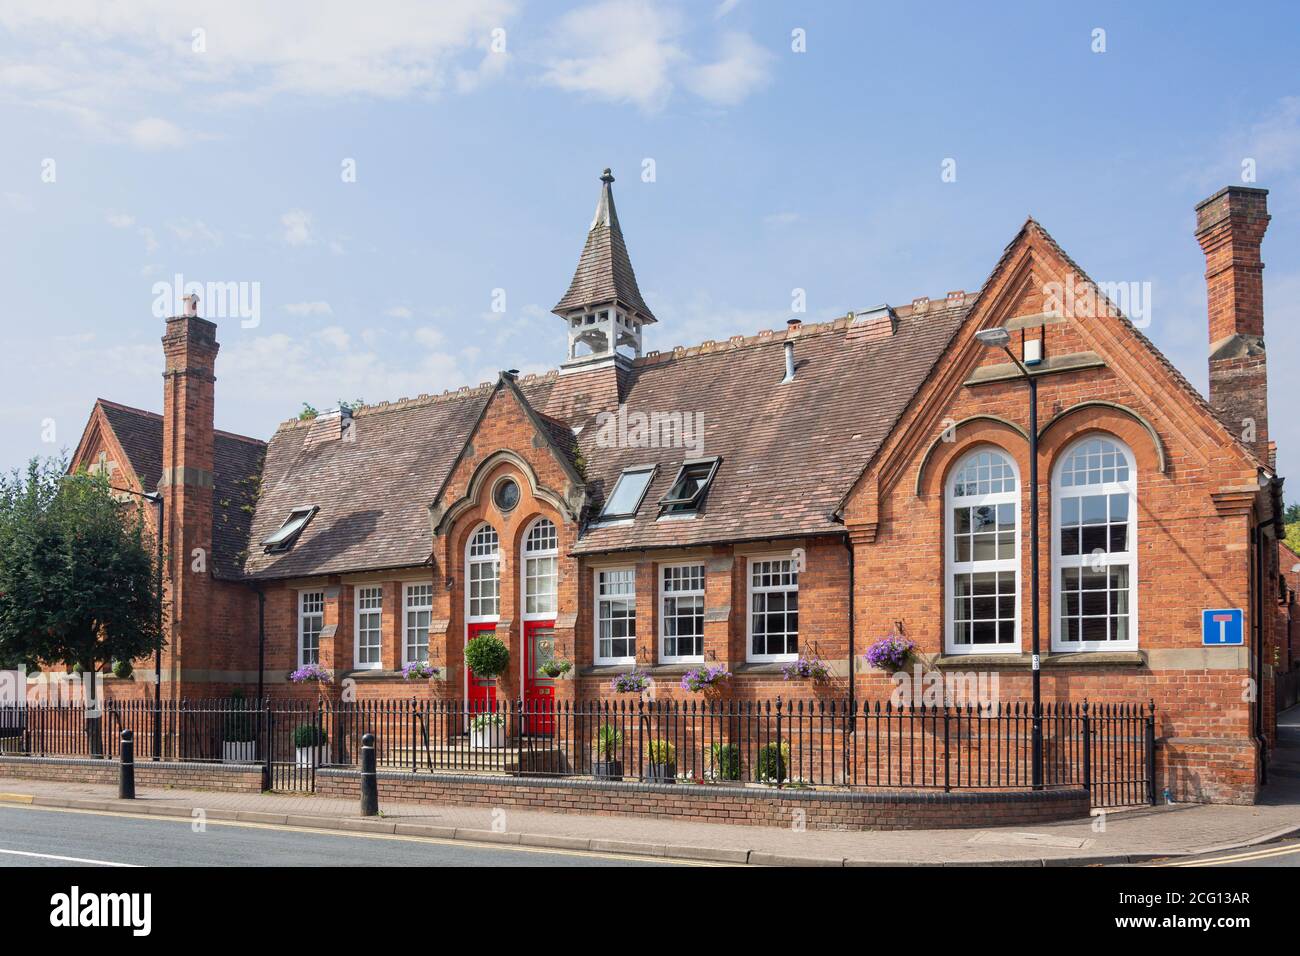 Ancien bâtiment scolaire, High Street, Henley-in-Arden, Warwickshire, Angleterre, Royaume-Uni Banque D'Images